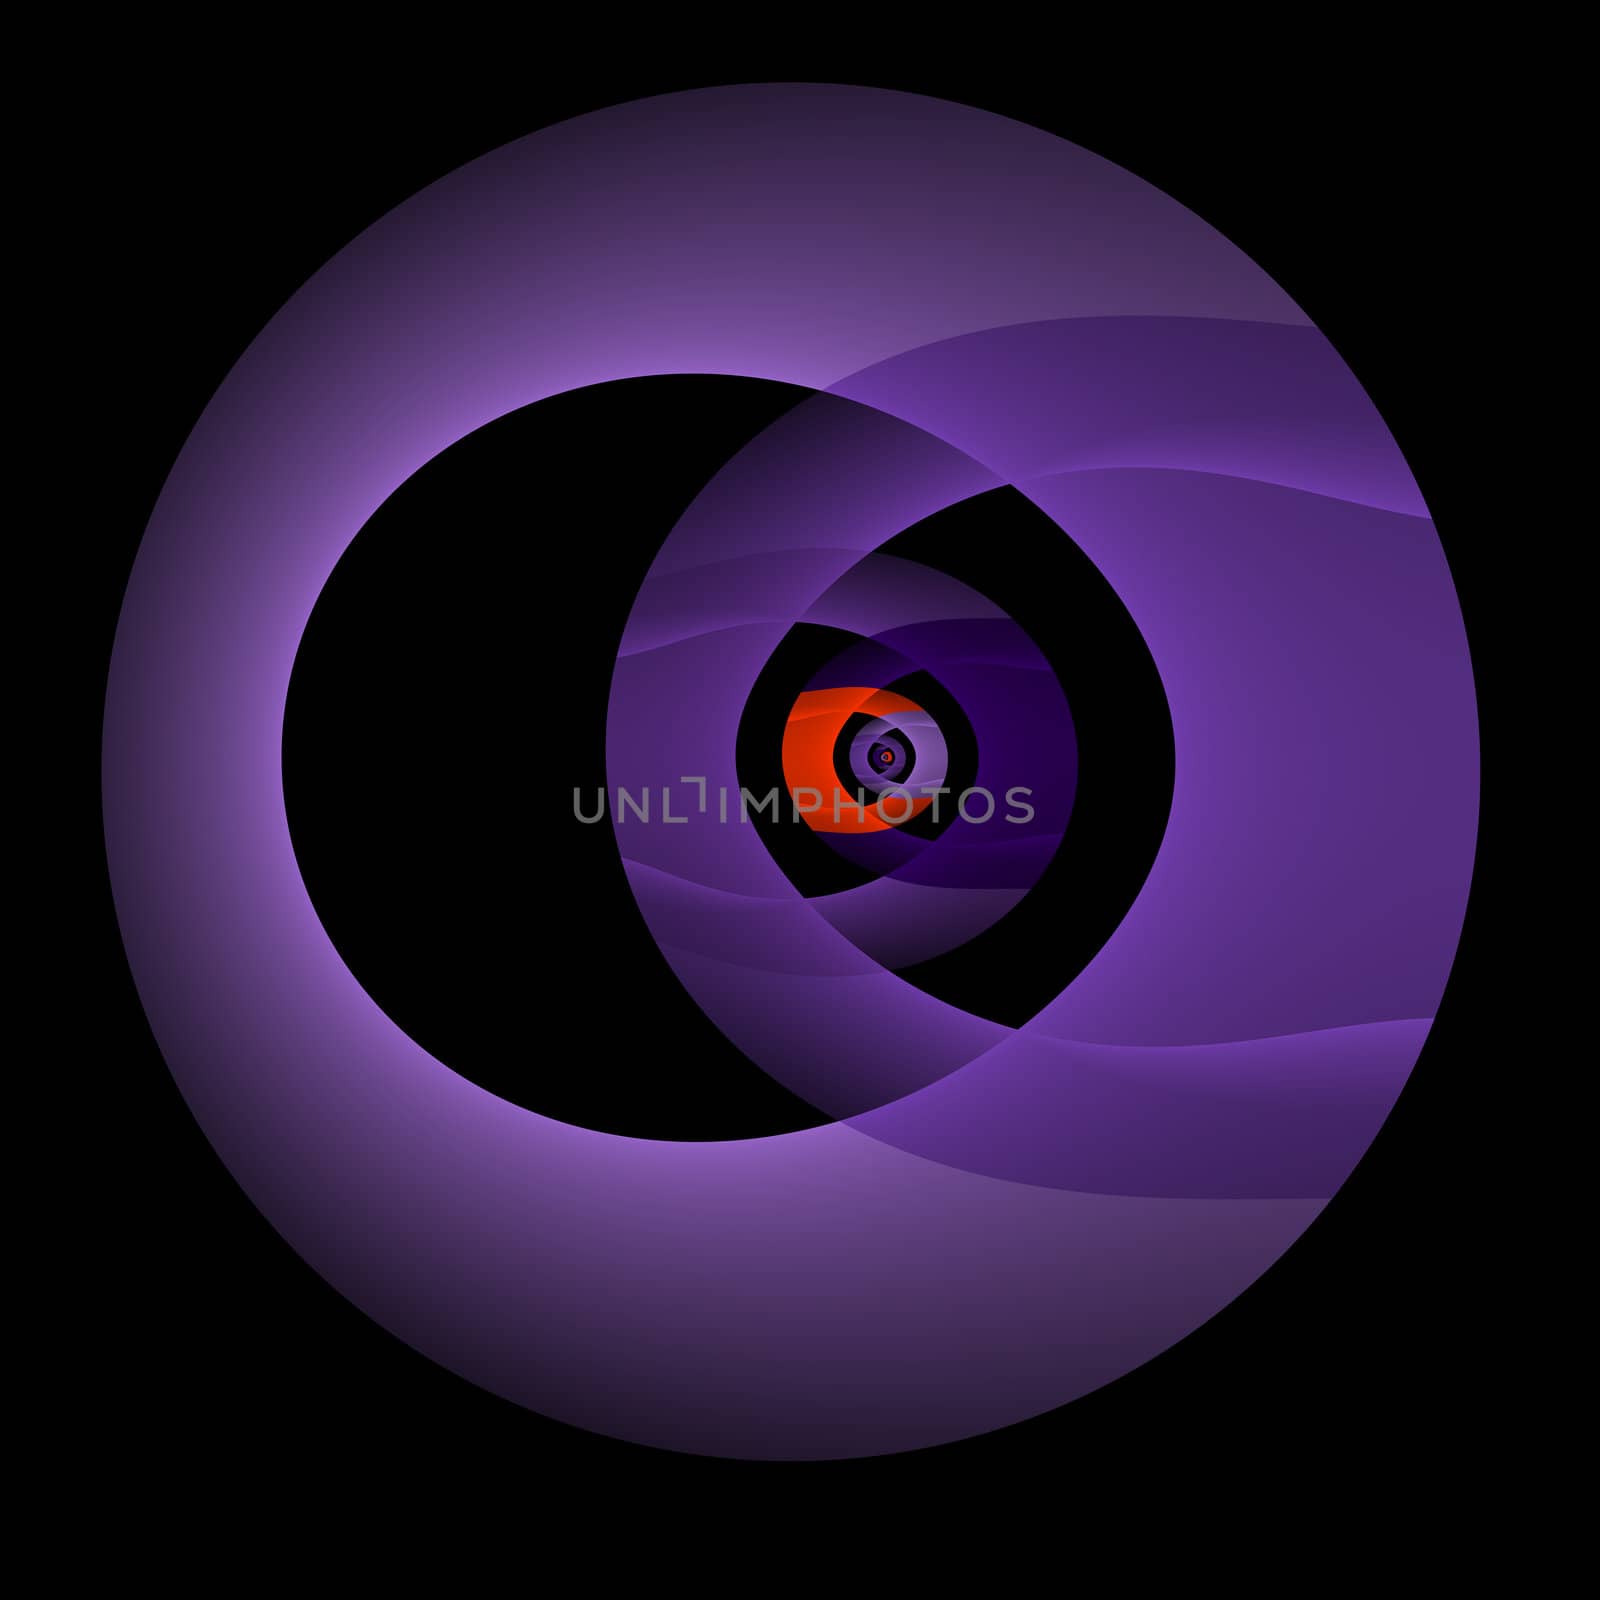 An abstract image done is shade of purple with orange accents on a black background.